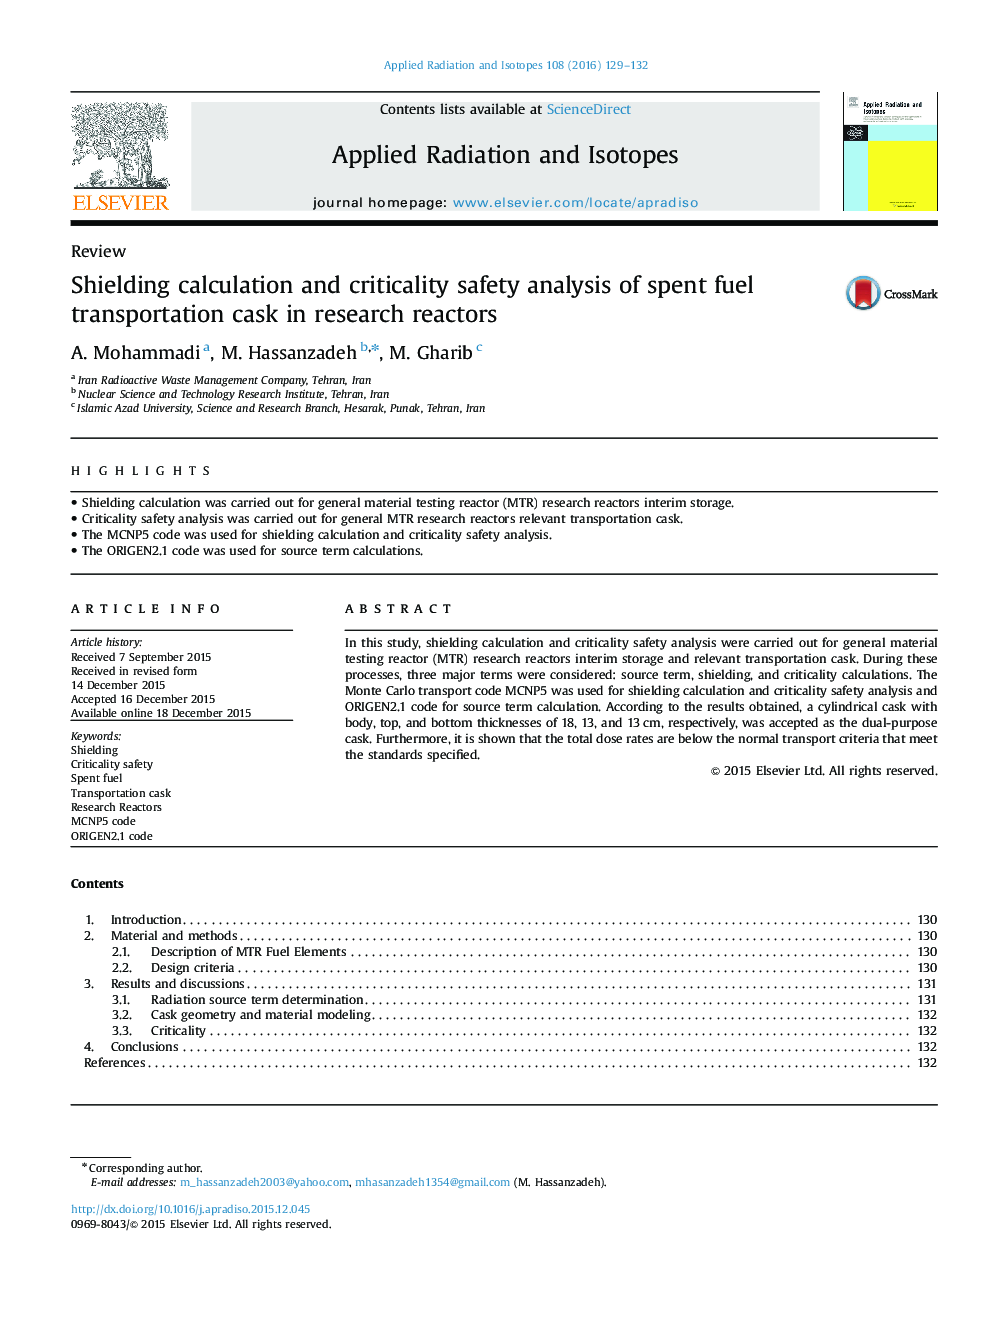 Shielding calculation and criticality safety analysis of spent fuel transportation cask in research reactors